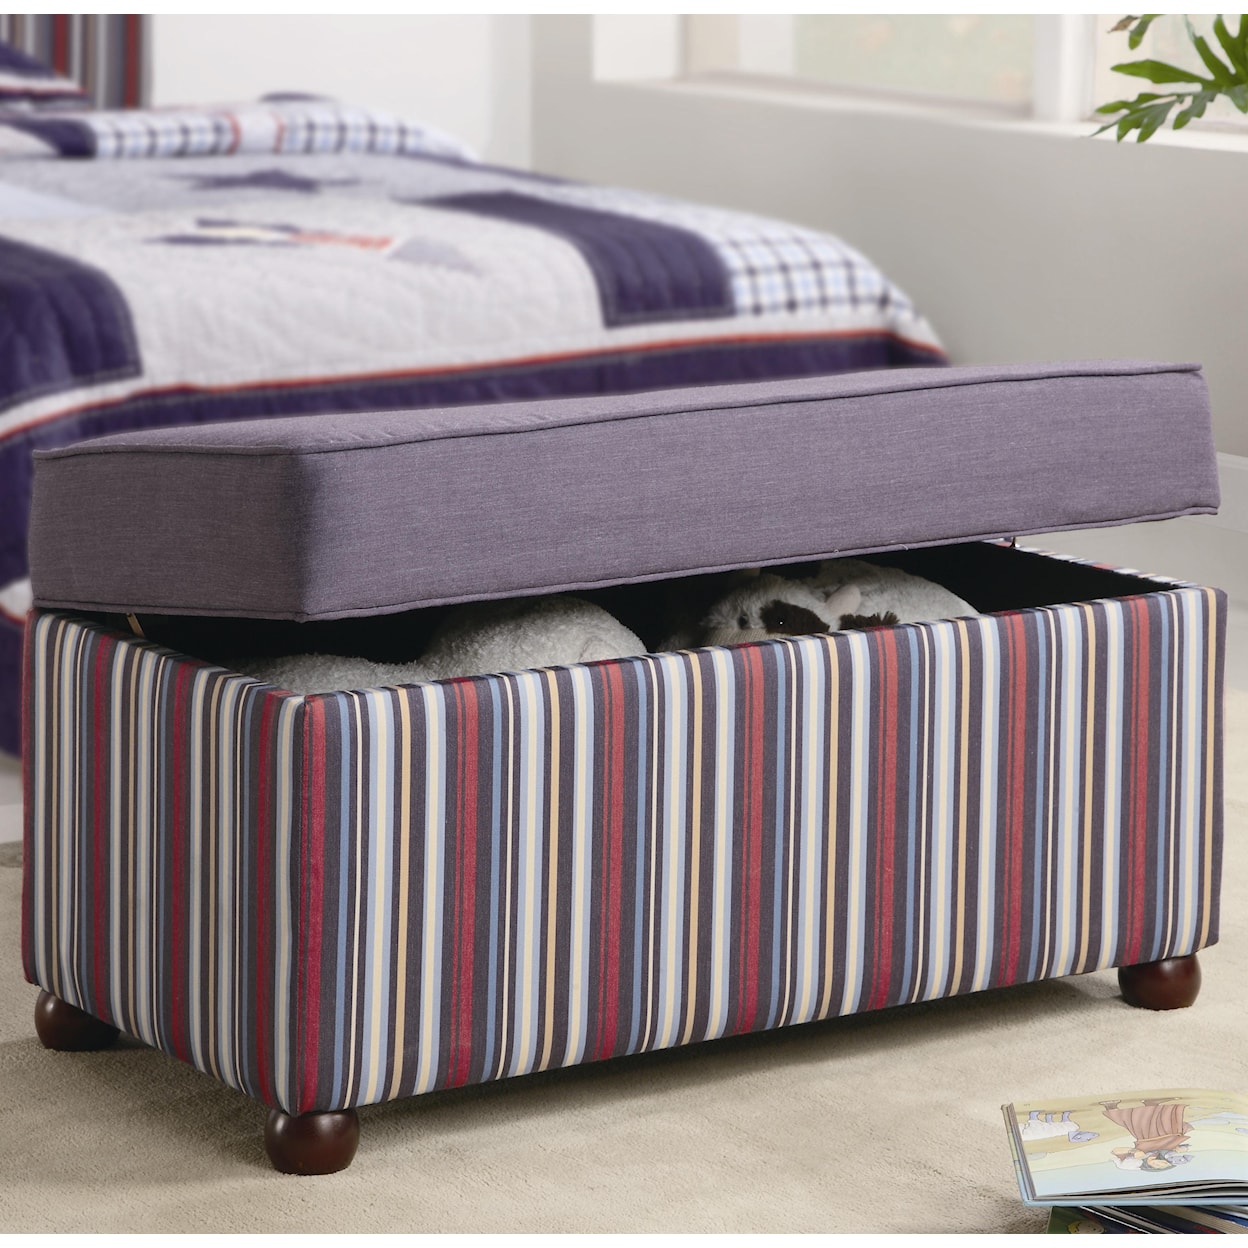 Coaster Furniture Youth Seating and Storage Storage Bench